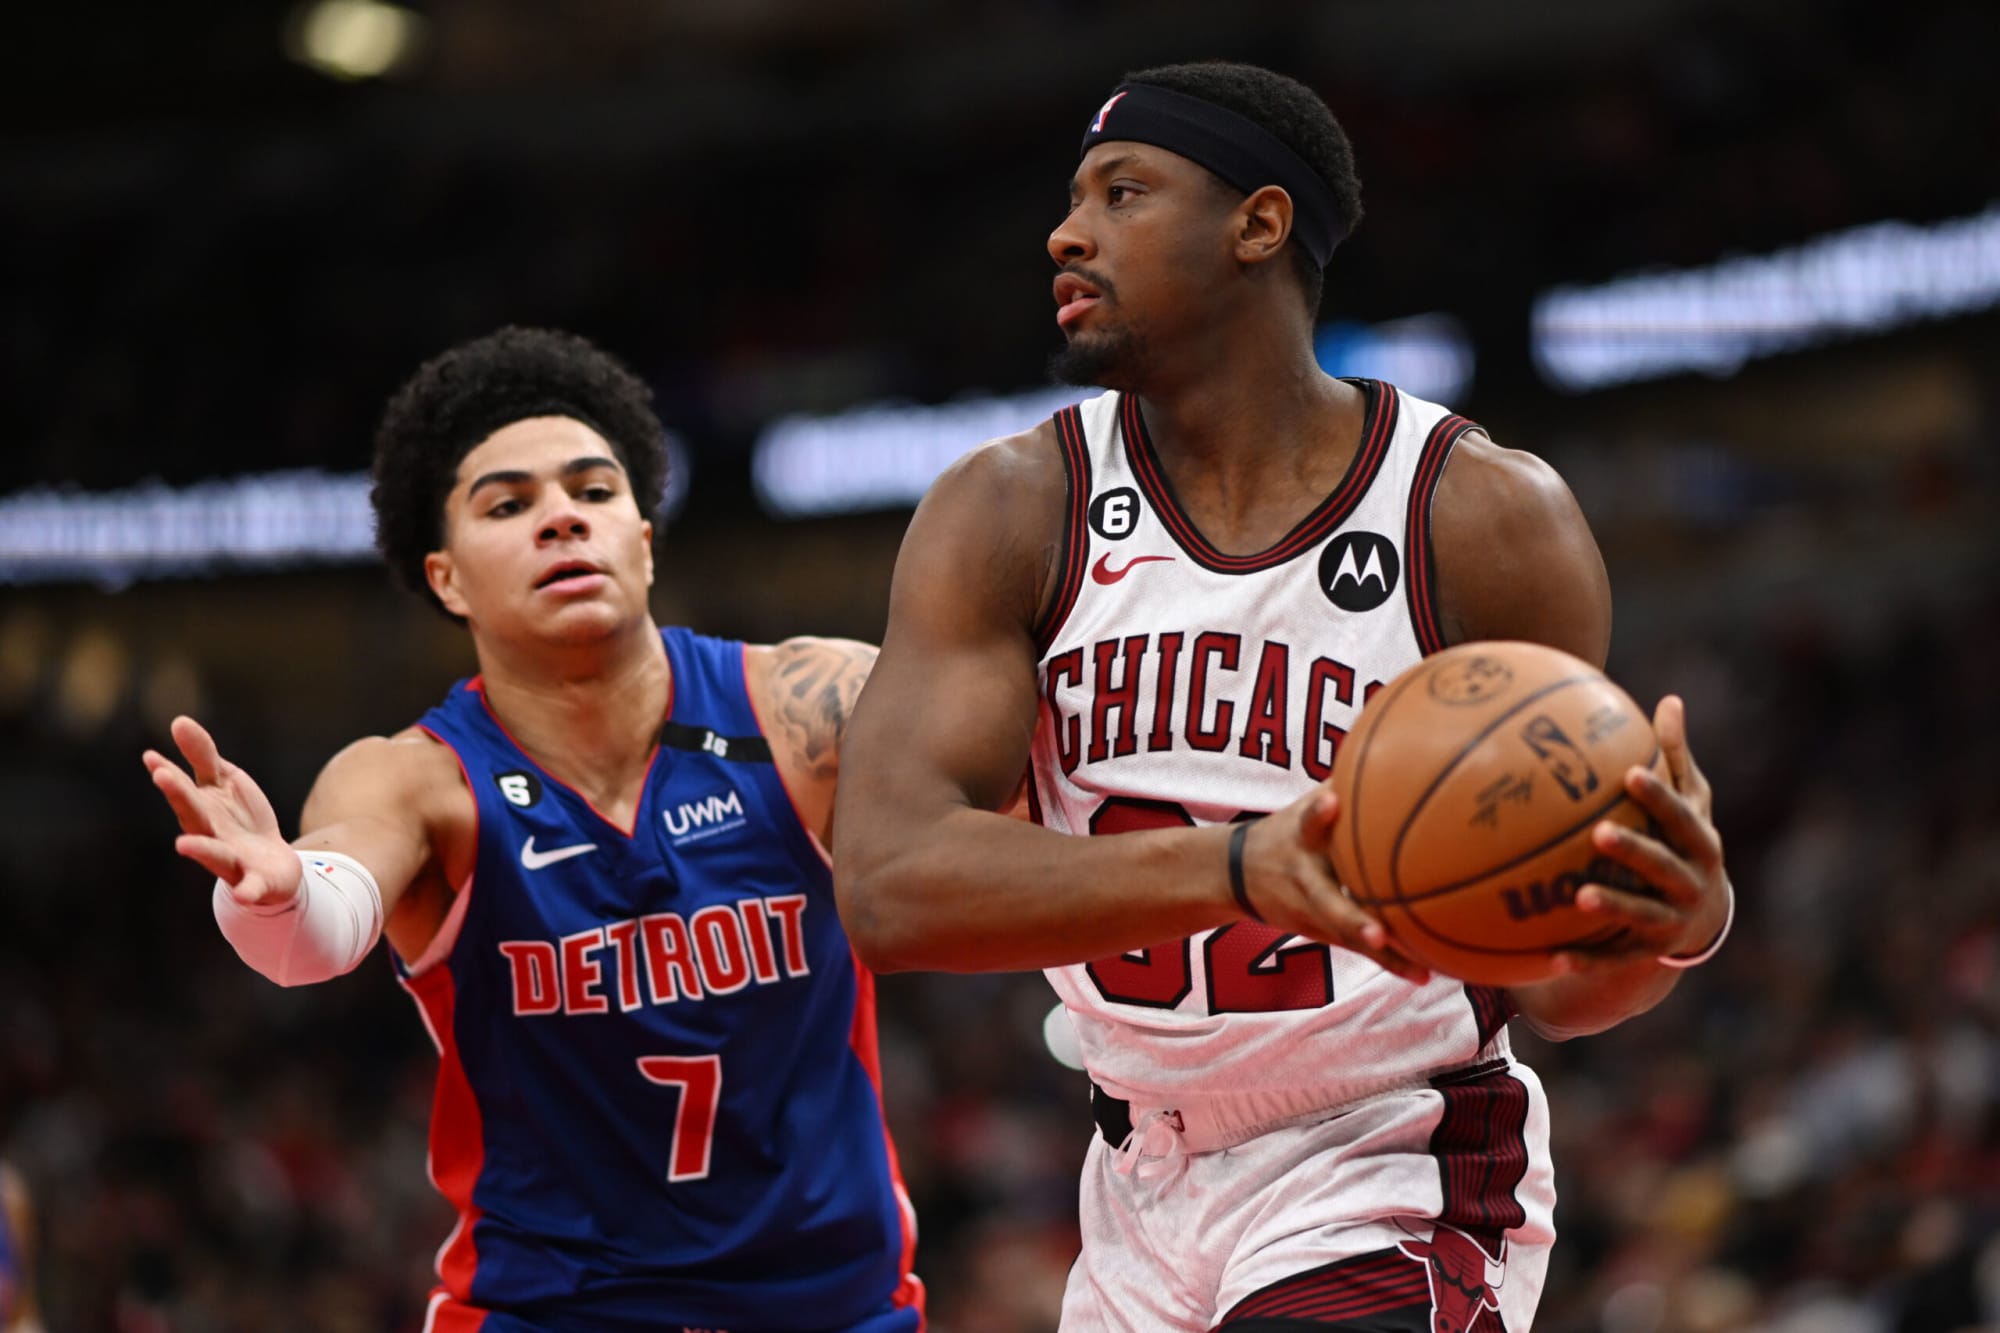 NBA trade deadline: Bulls roster has suddenly become overly fragile in an  imperfect season - Chicago Sun-Times